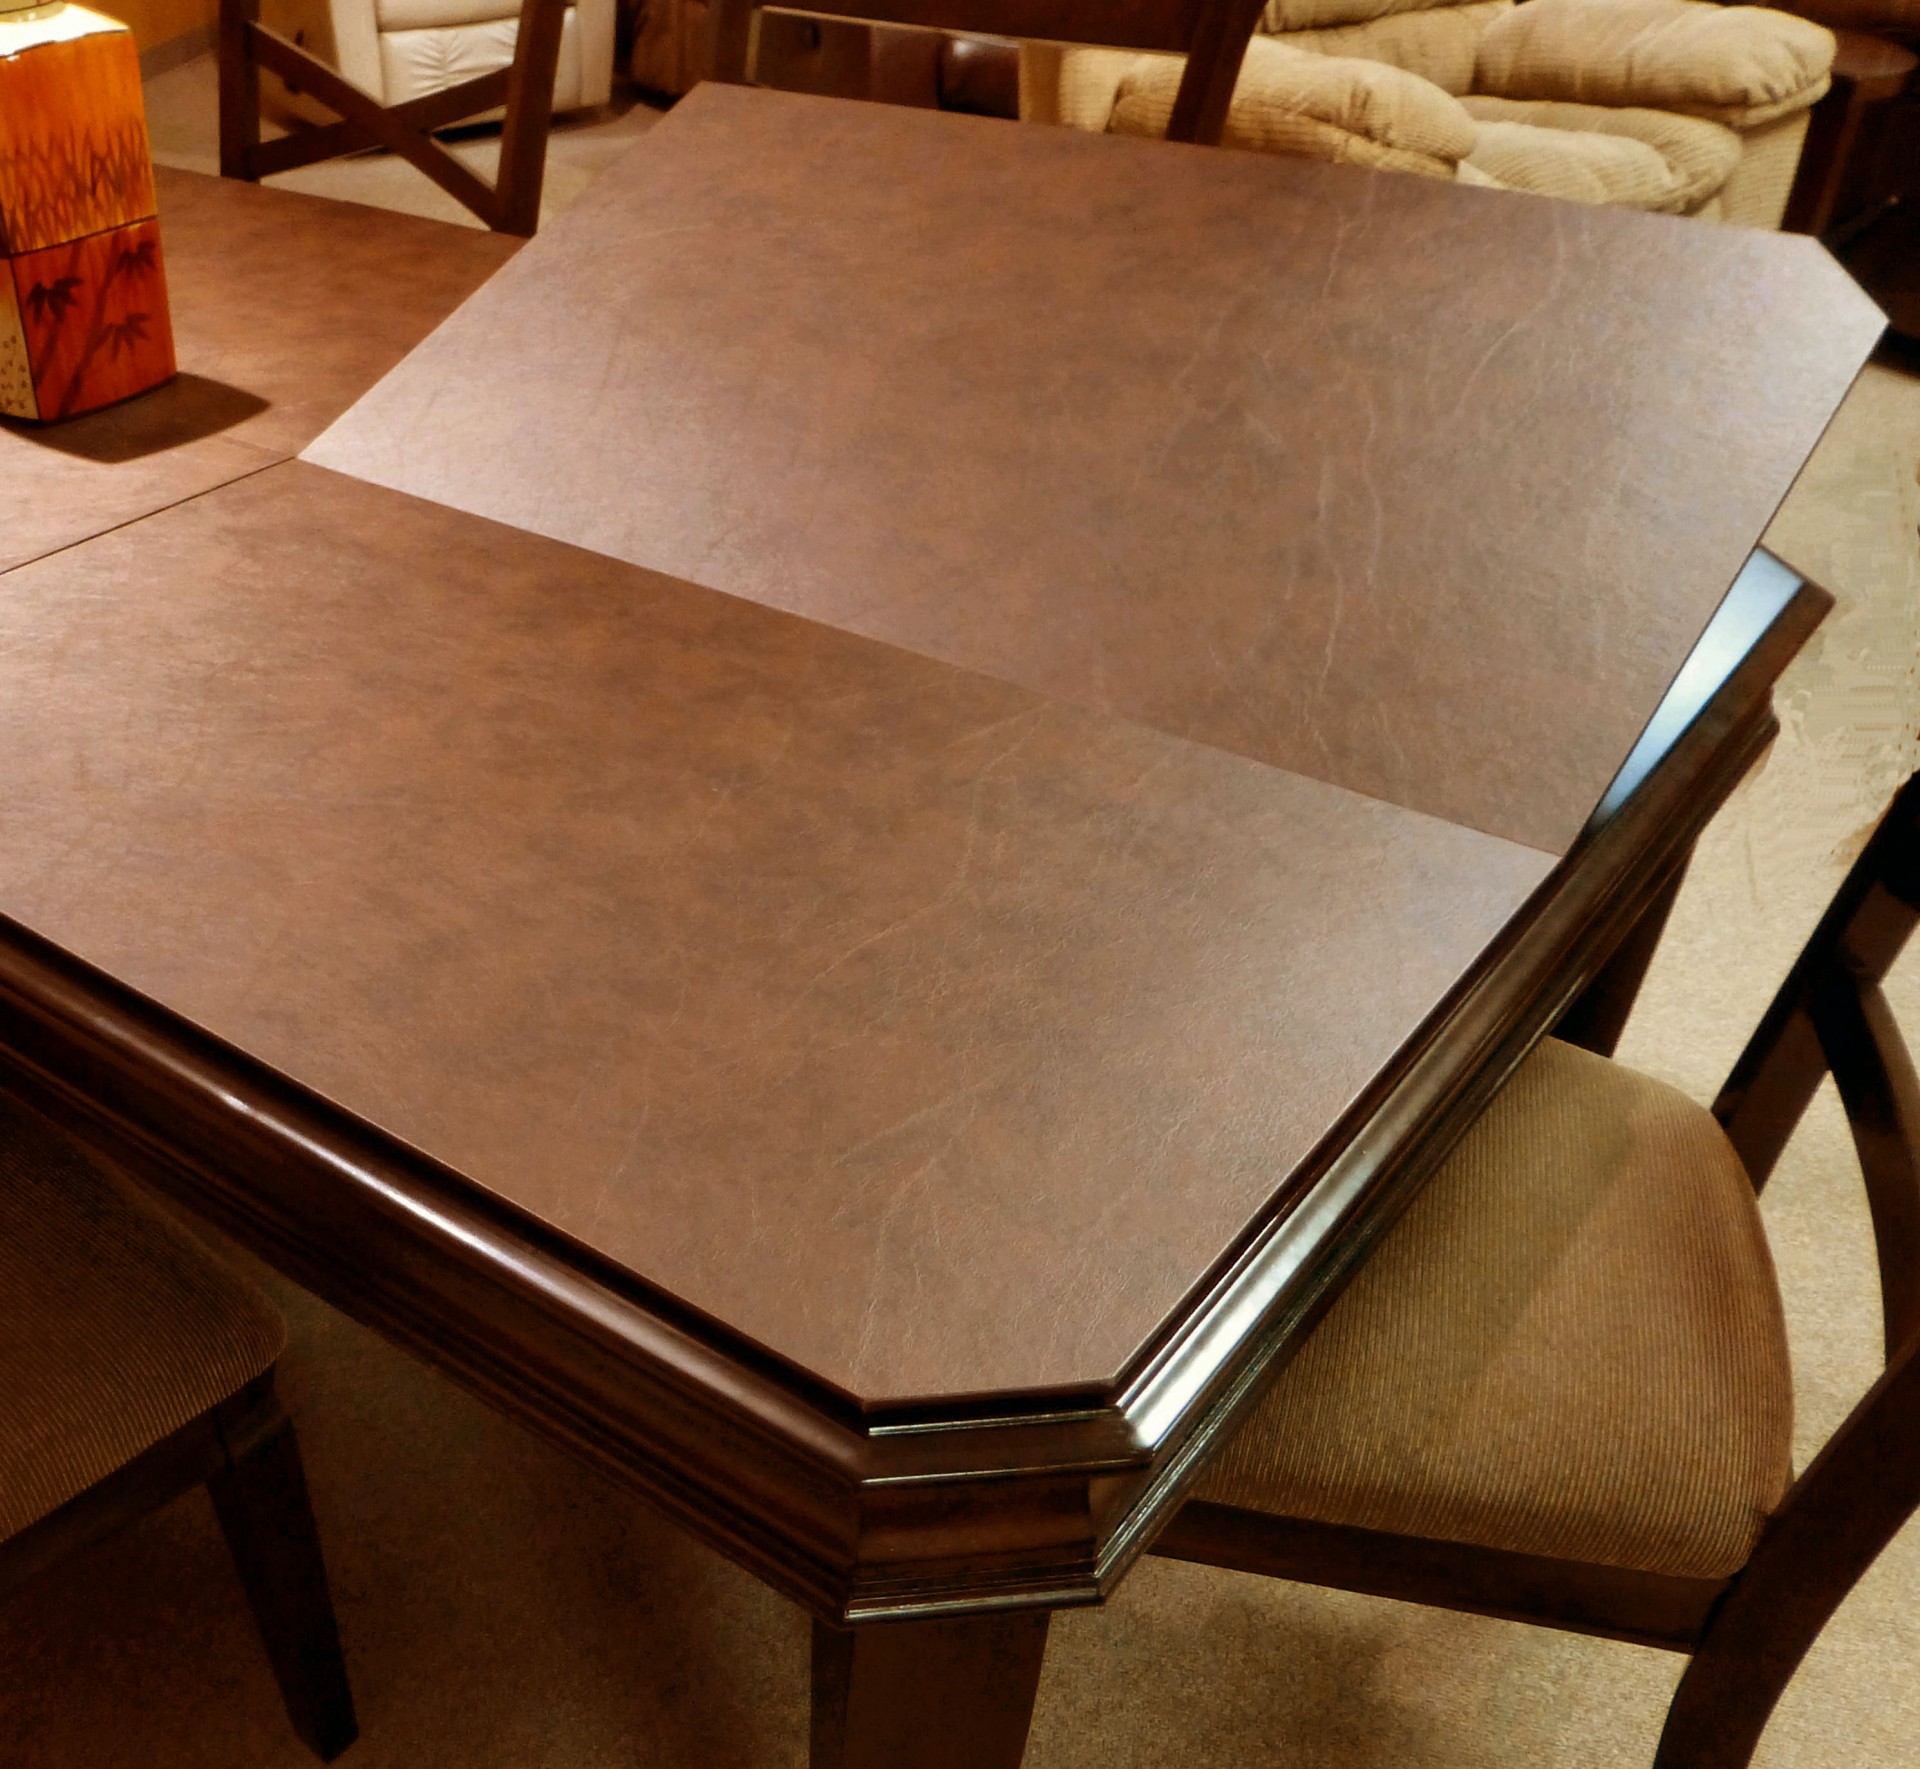 Custom Made Dining Room Table Pad Protector - Top Quality